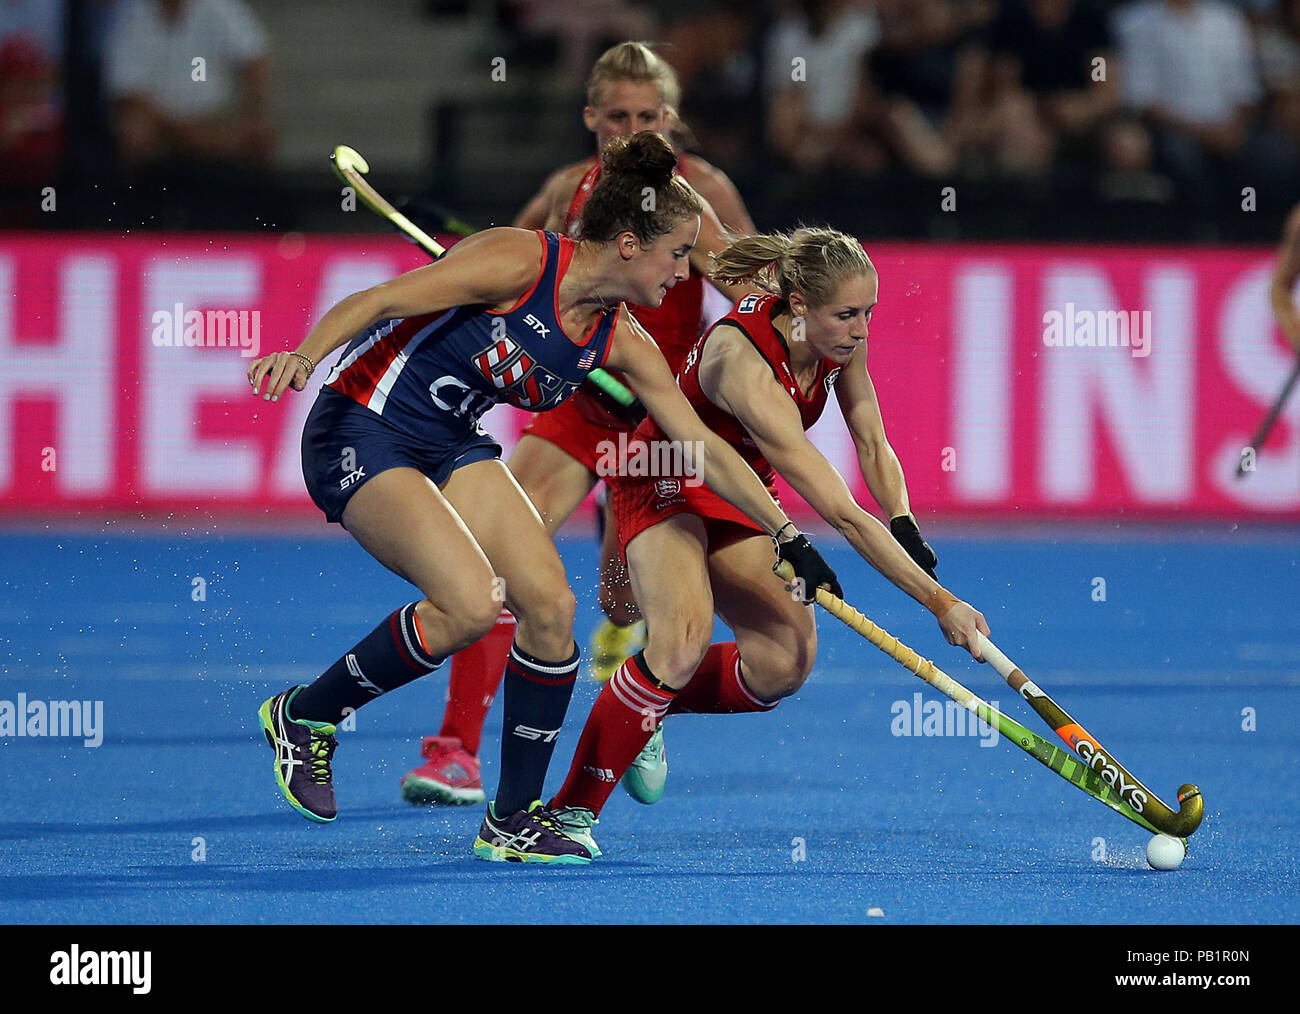 England's Jo Hunter in action during the national Vitality Women's Hockey World Cup match at The Lee Valley Hockey and Tennis Centre, London. PRESS ASSOCIATION Photo, Picture date: Wednesday July 25, 2018. Photo credit should read: Steven Paston/PA Wire. Stock Photo